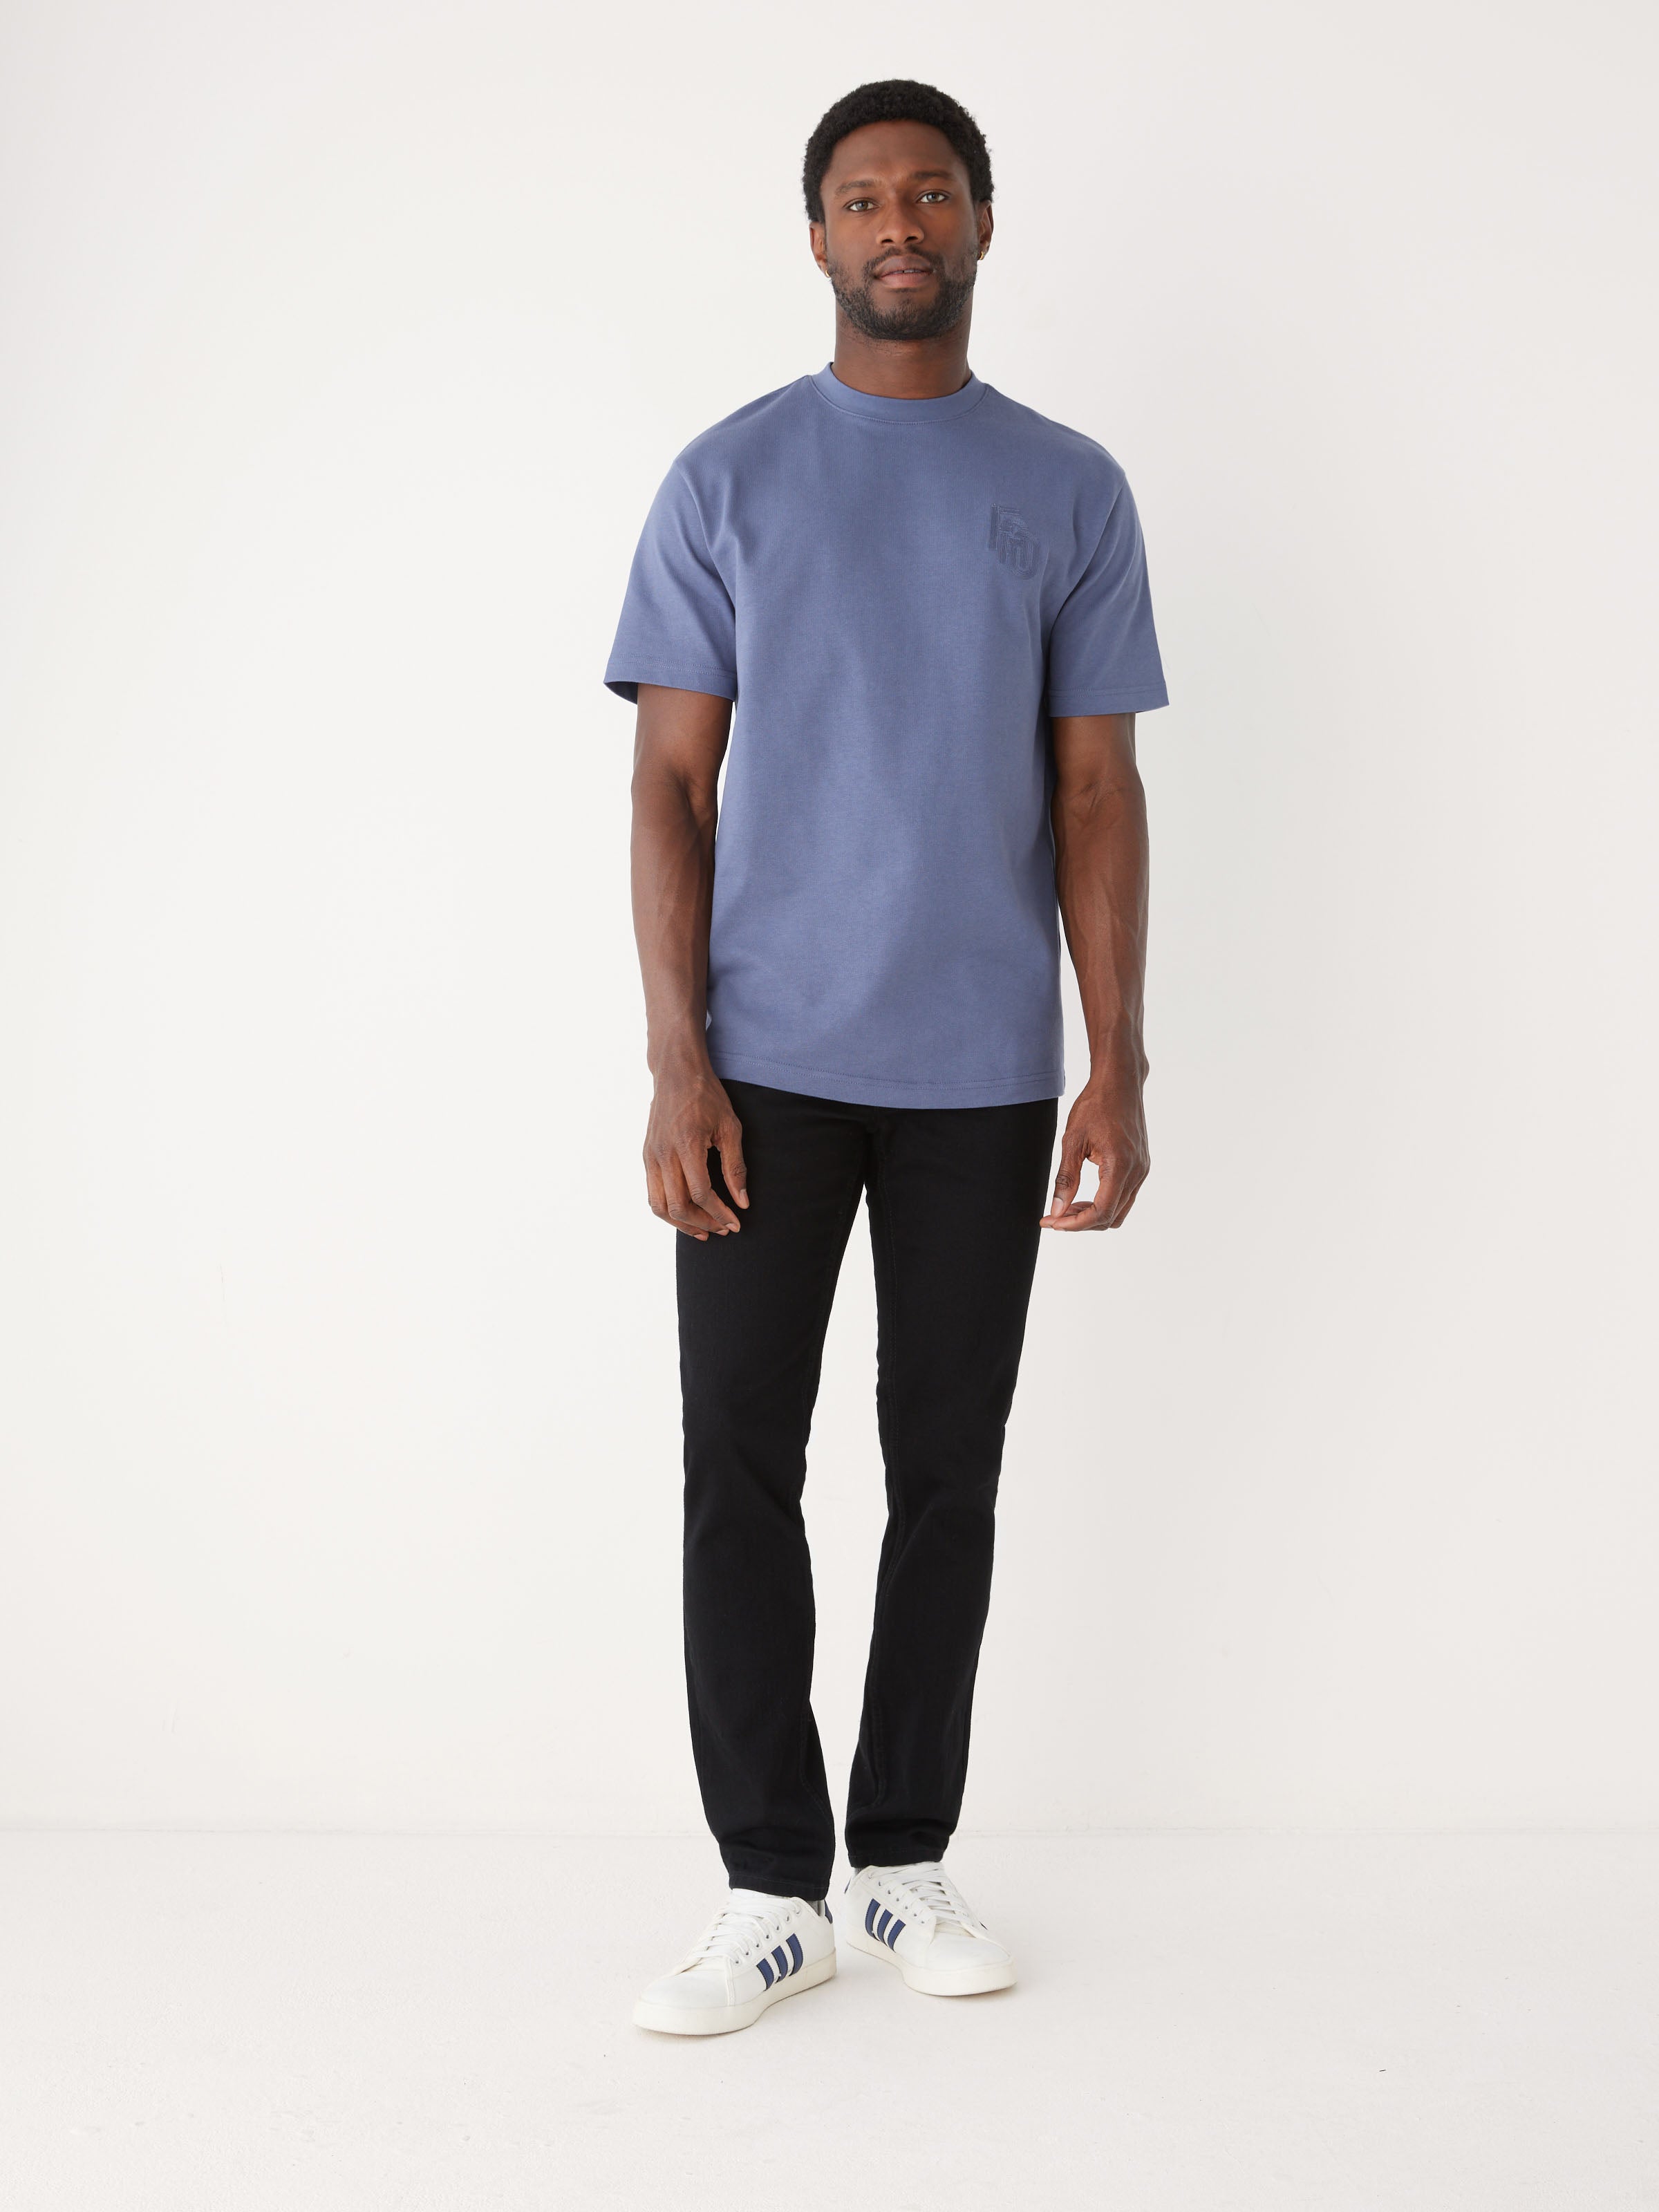 The Relaxed Logo T-shirt in Nightshadow Blue